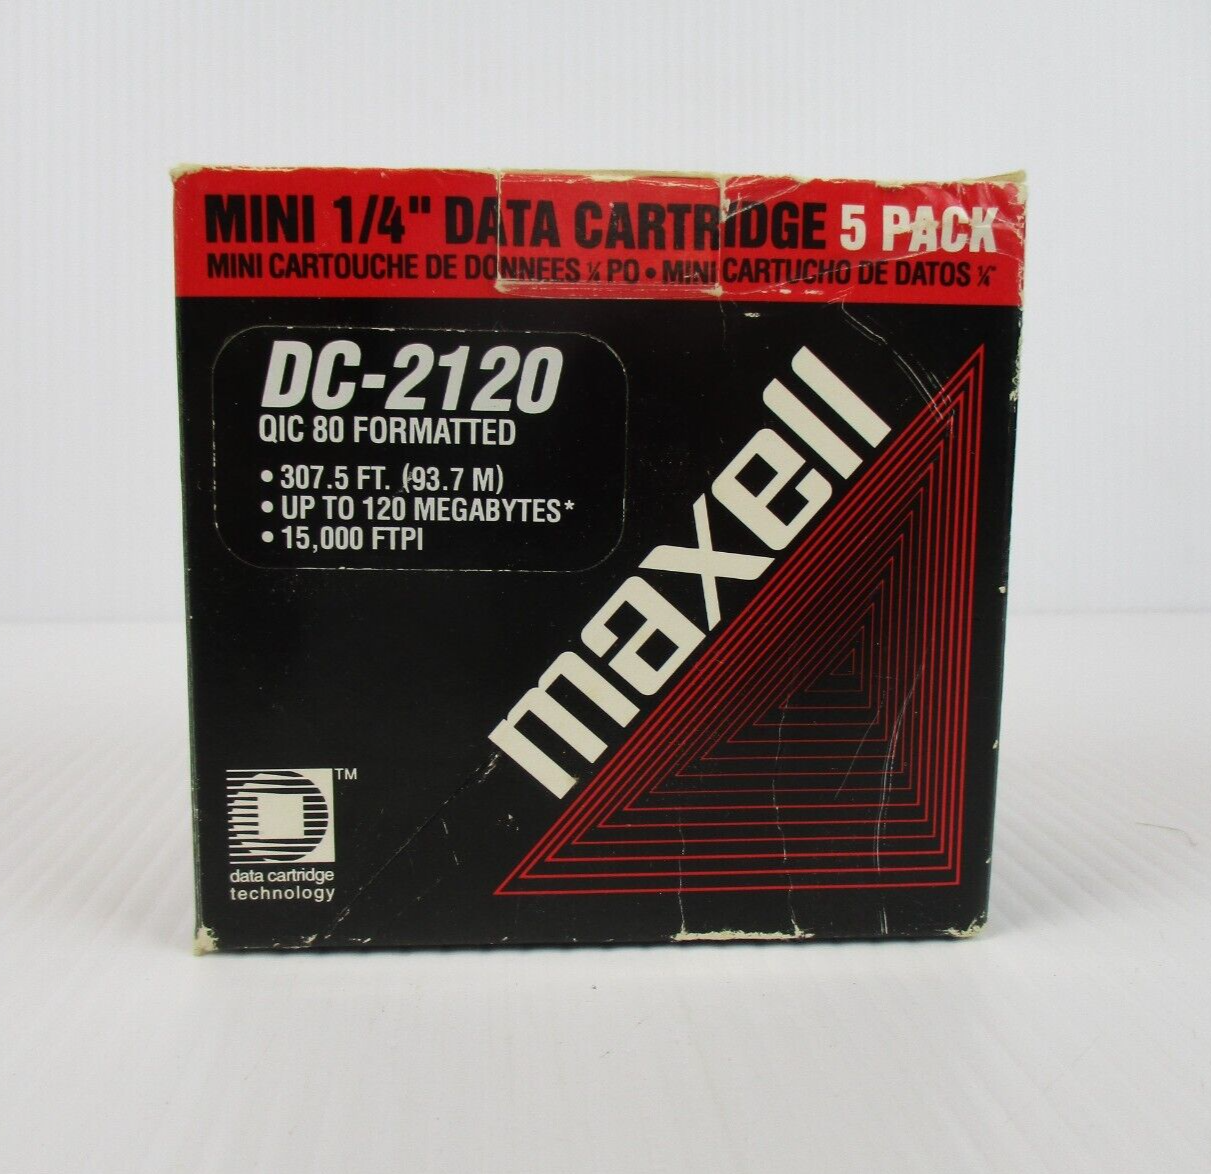 Maxell Data Cartridges DC-2120 QIC80 Formatted Mini 1/4" 5 Pack New In Box - $17.50